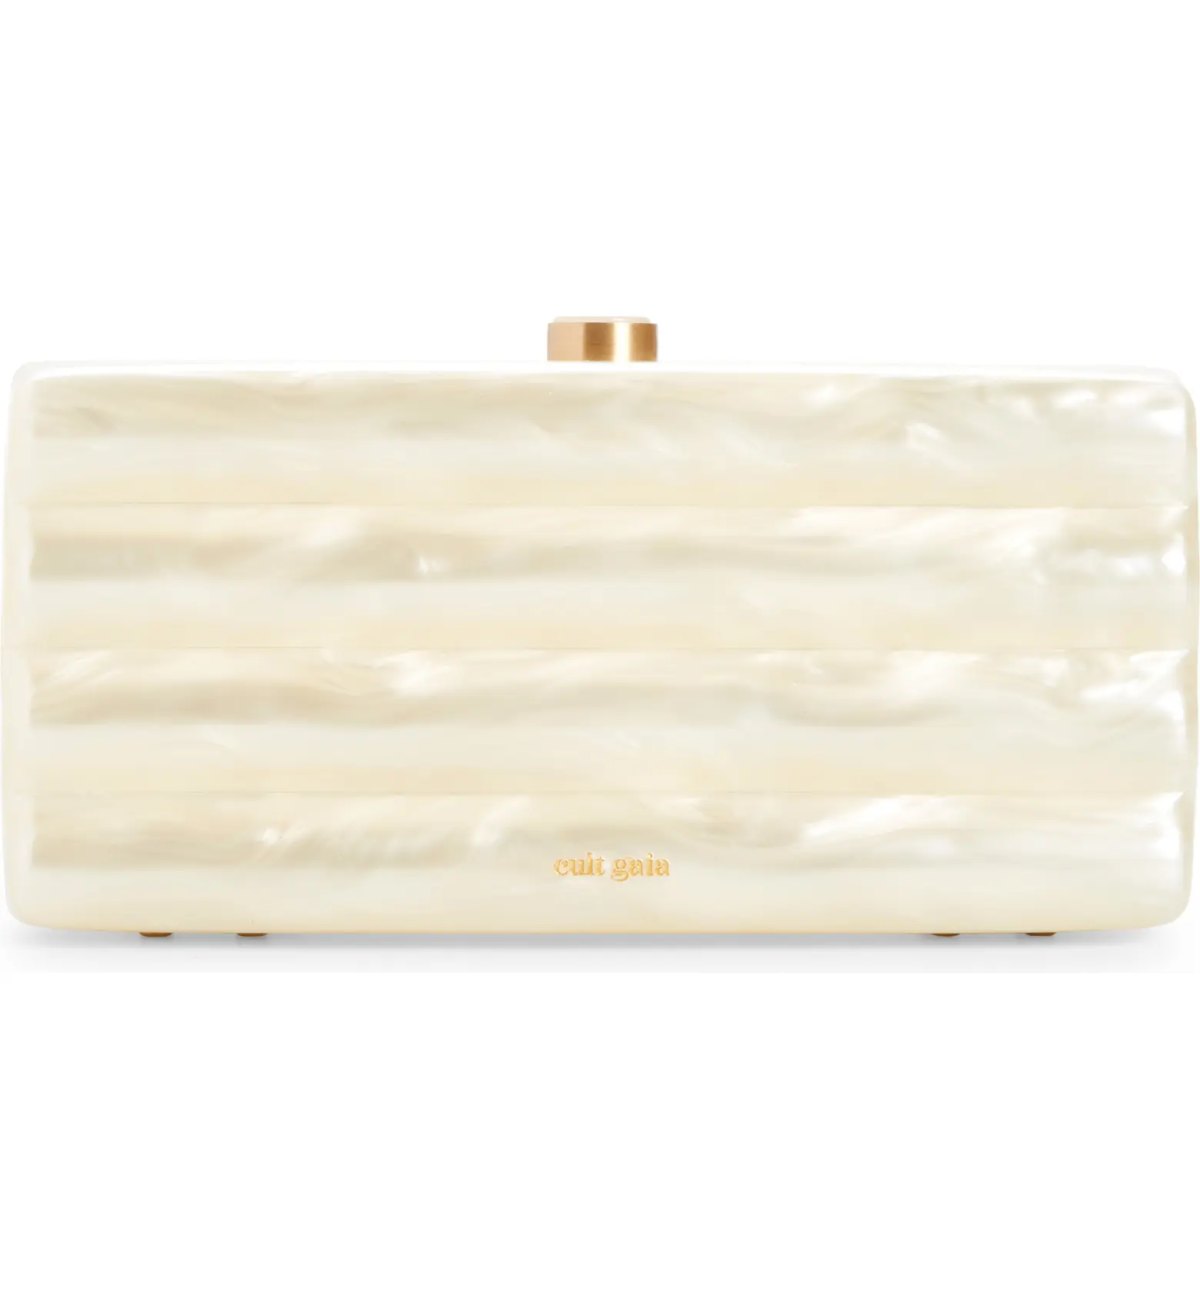 The 12 Best Designer Clutches – From Daytime to Evening Bags